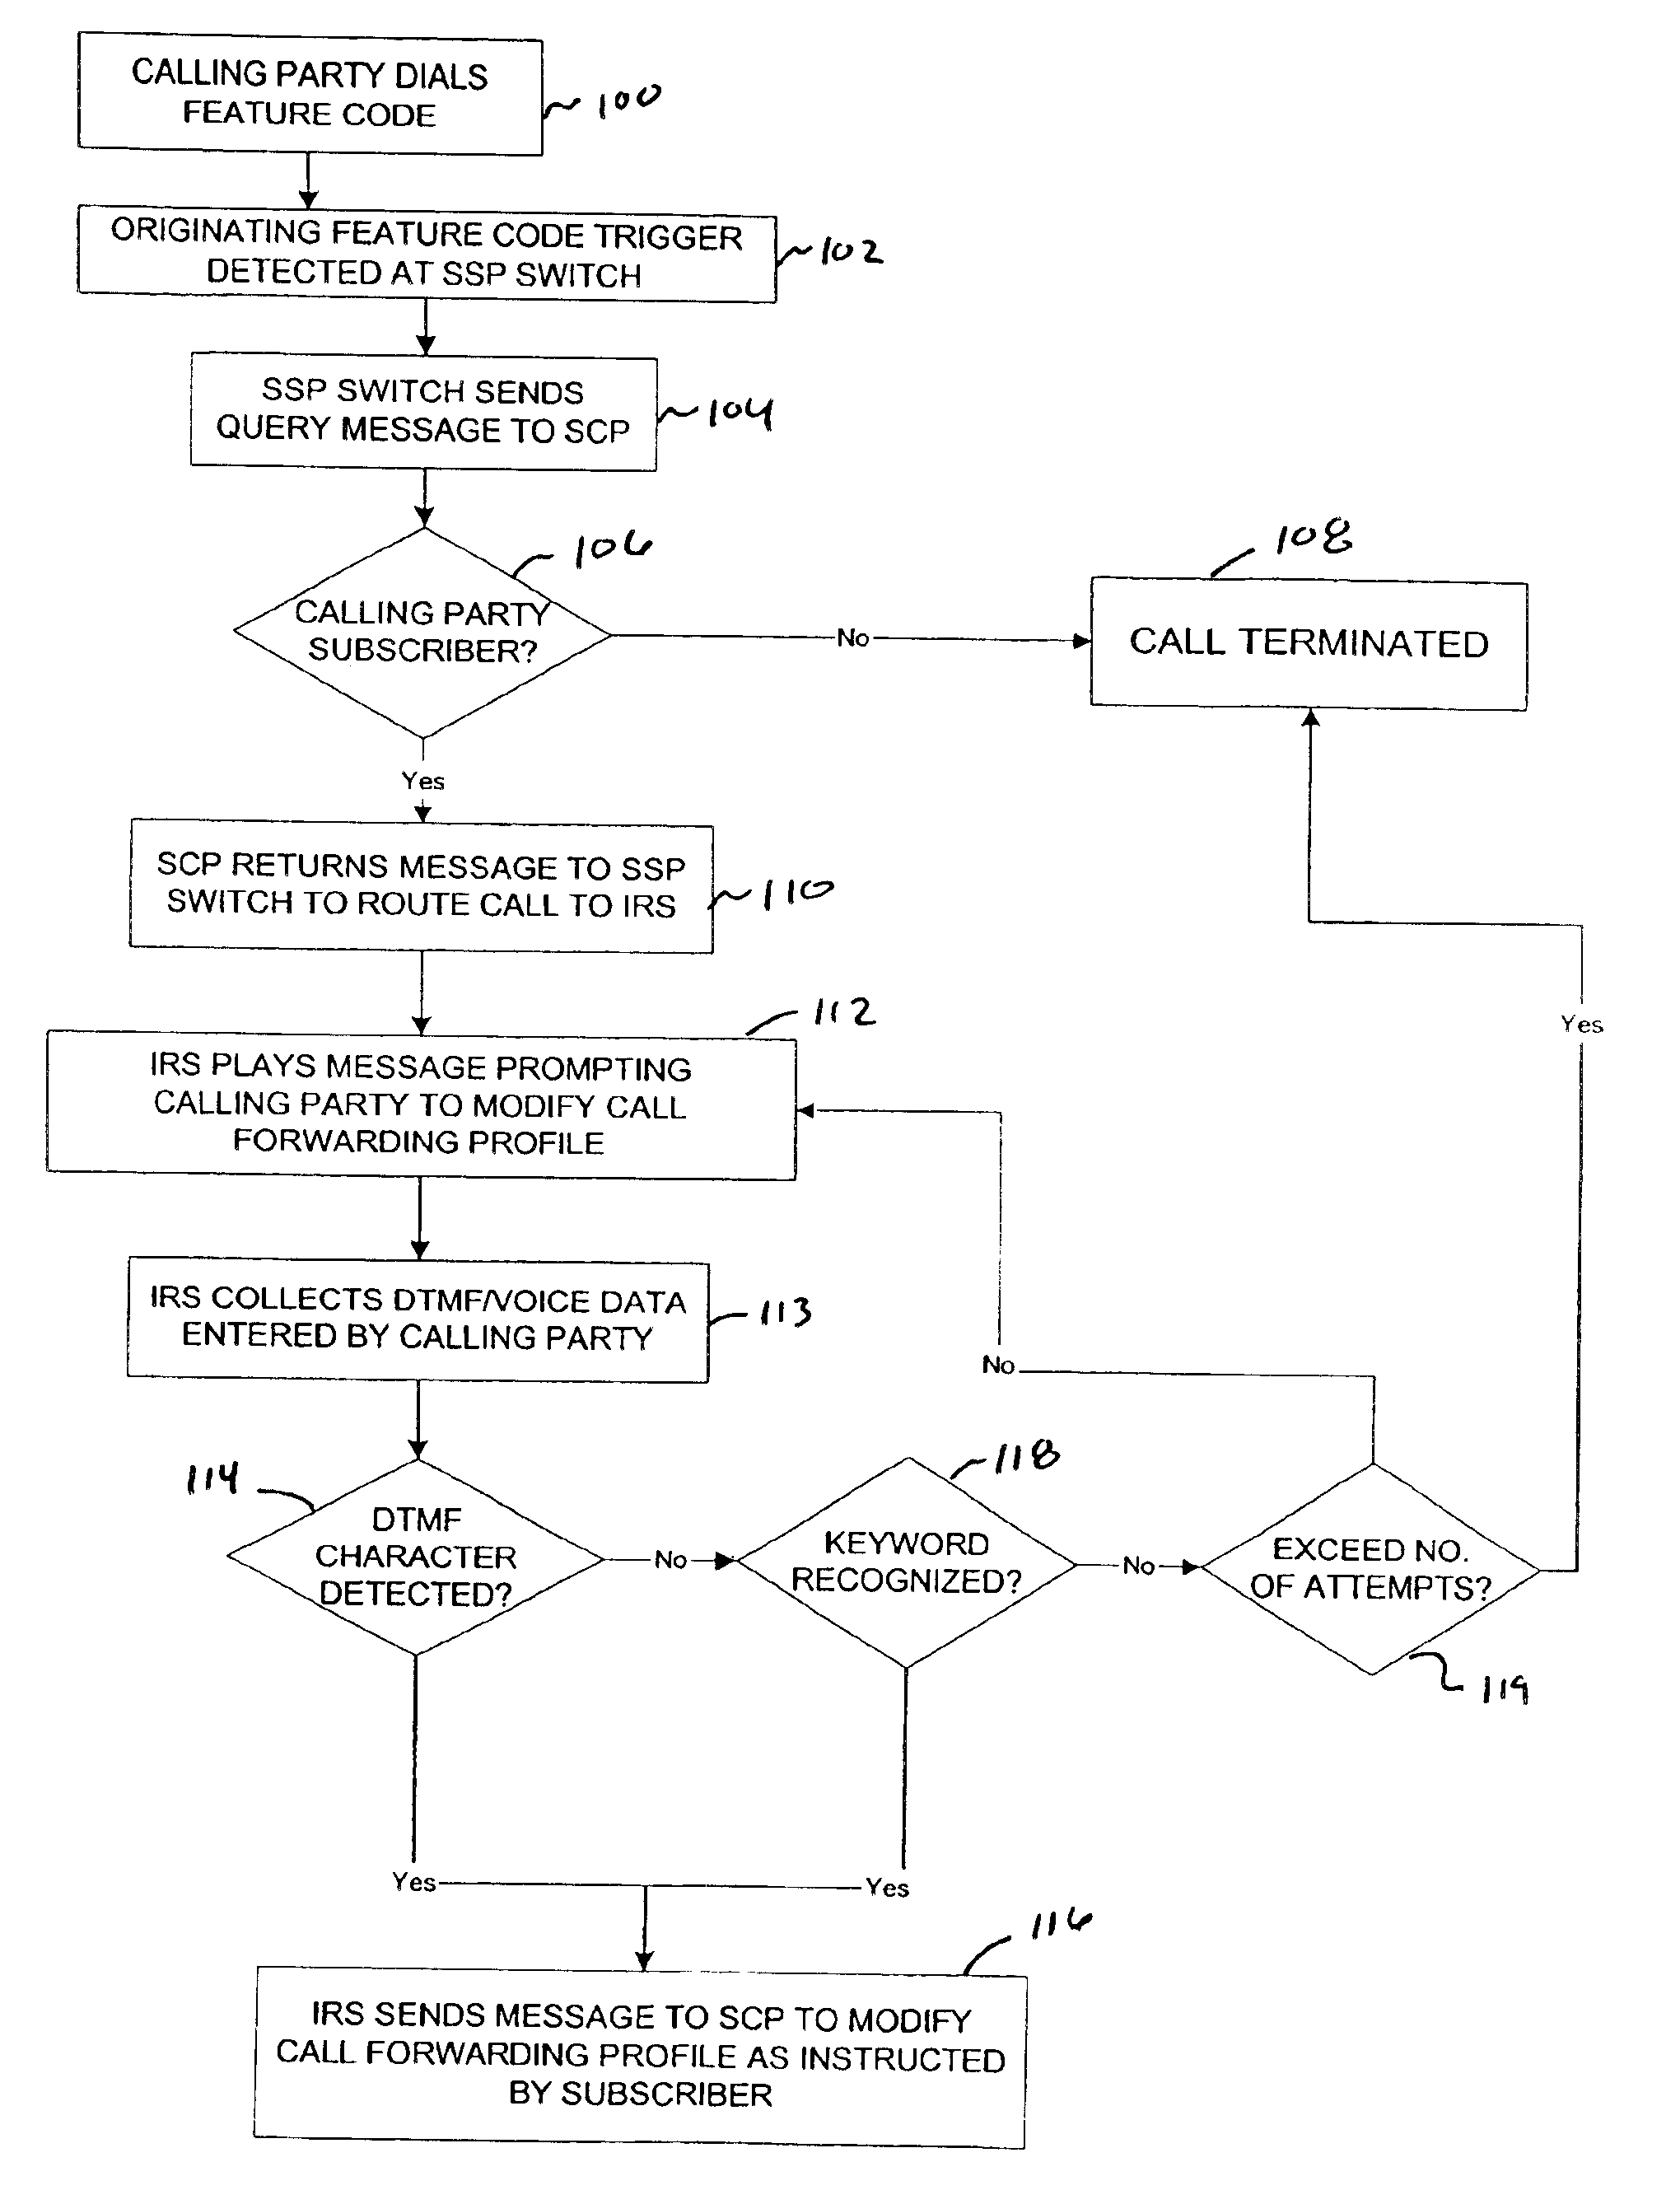 Network and method for providing a name and number delivery telecommunications services with automatic speech recognition capability